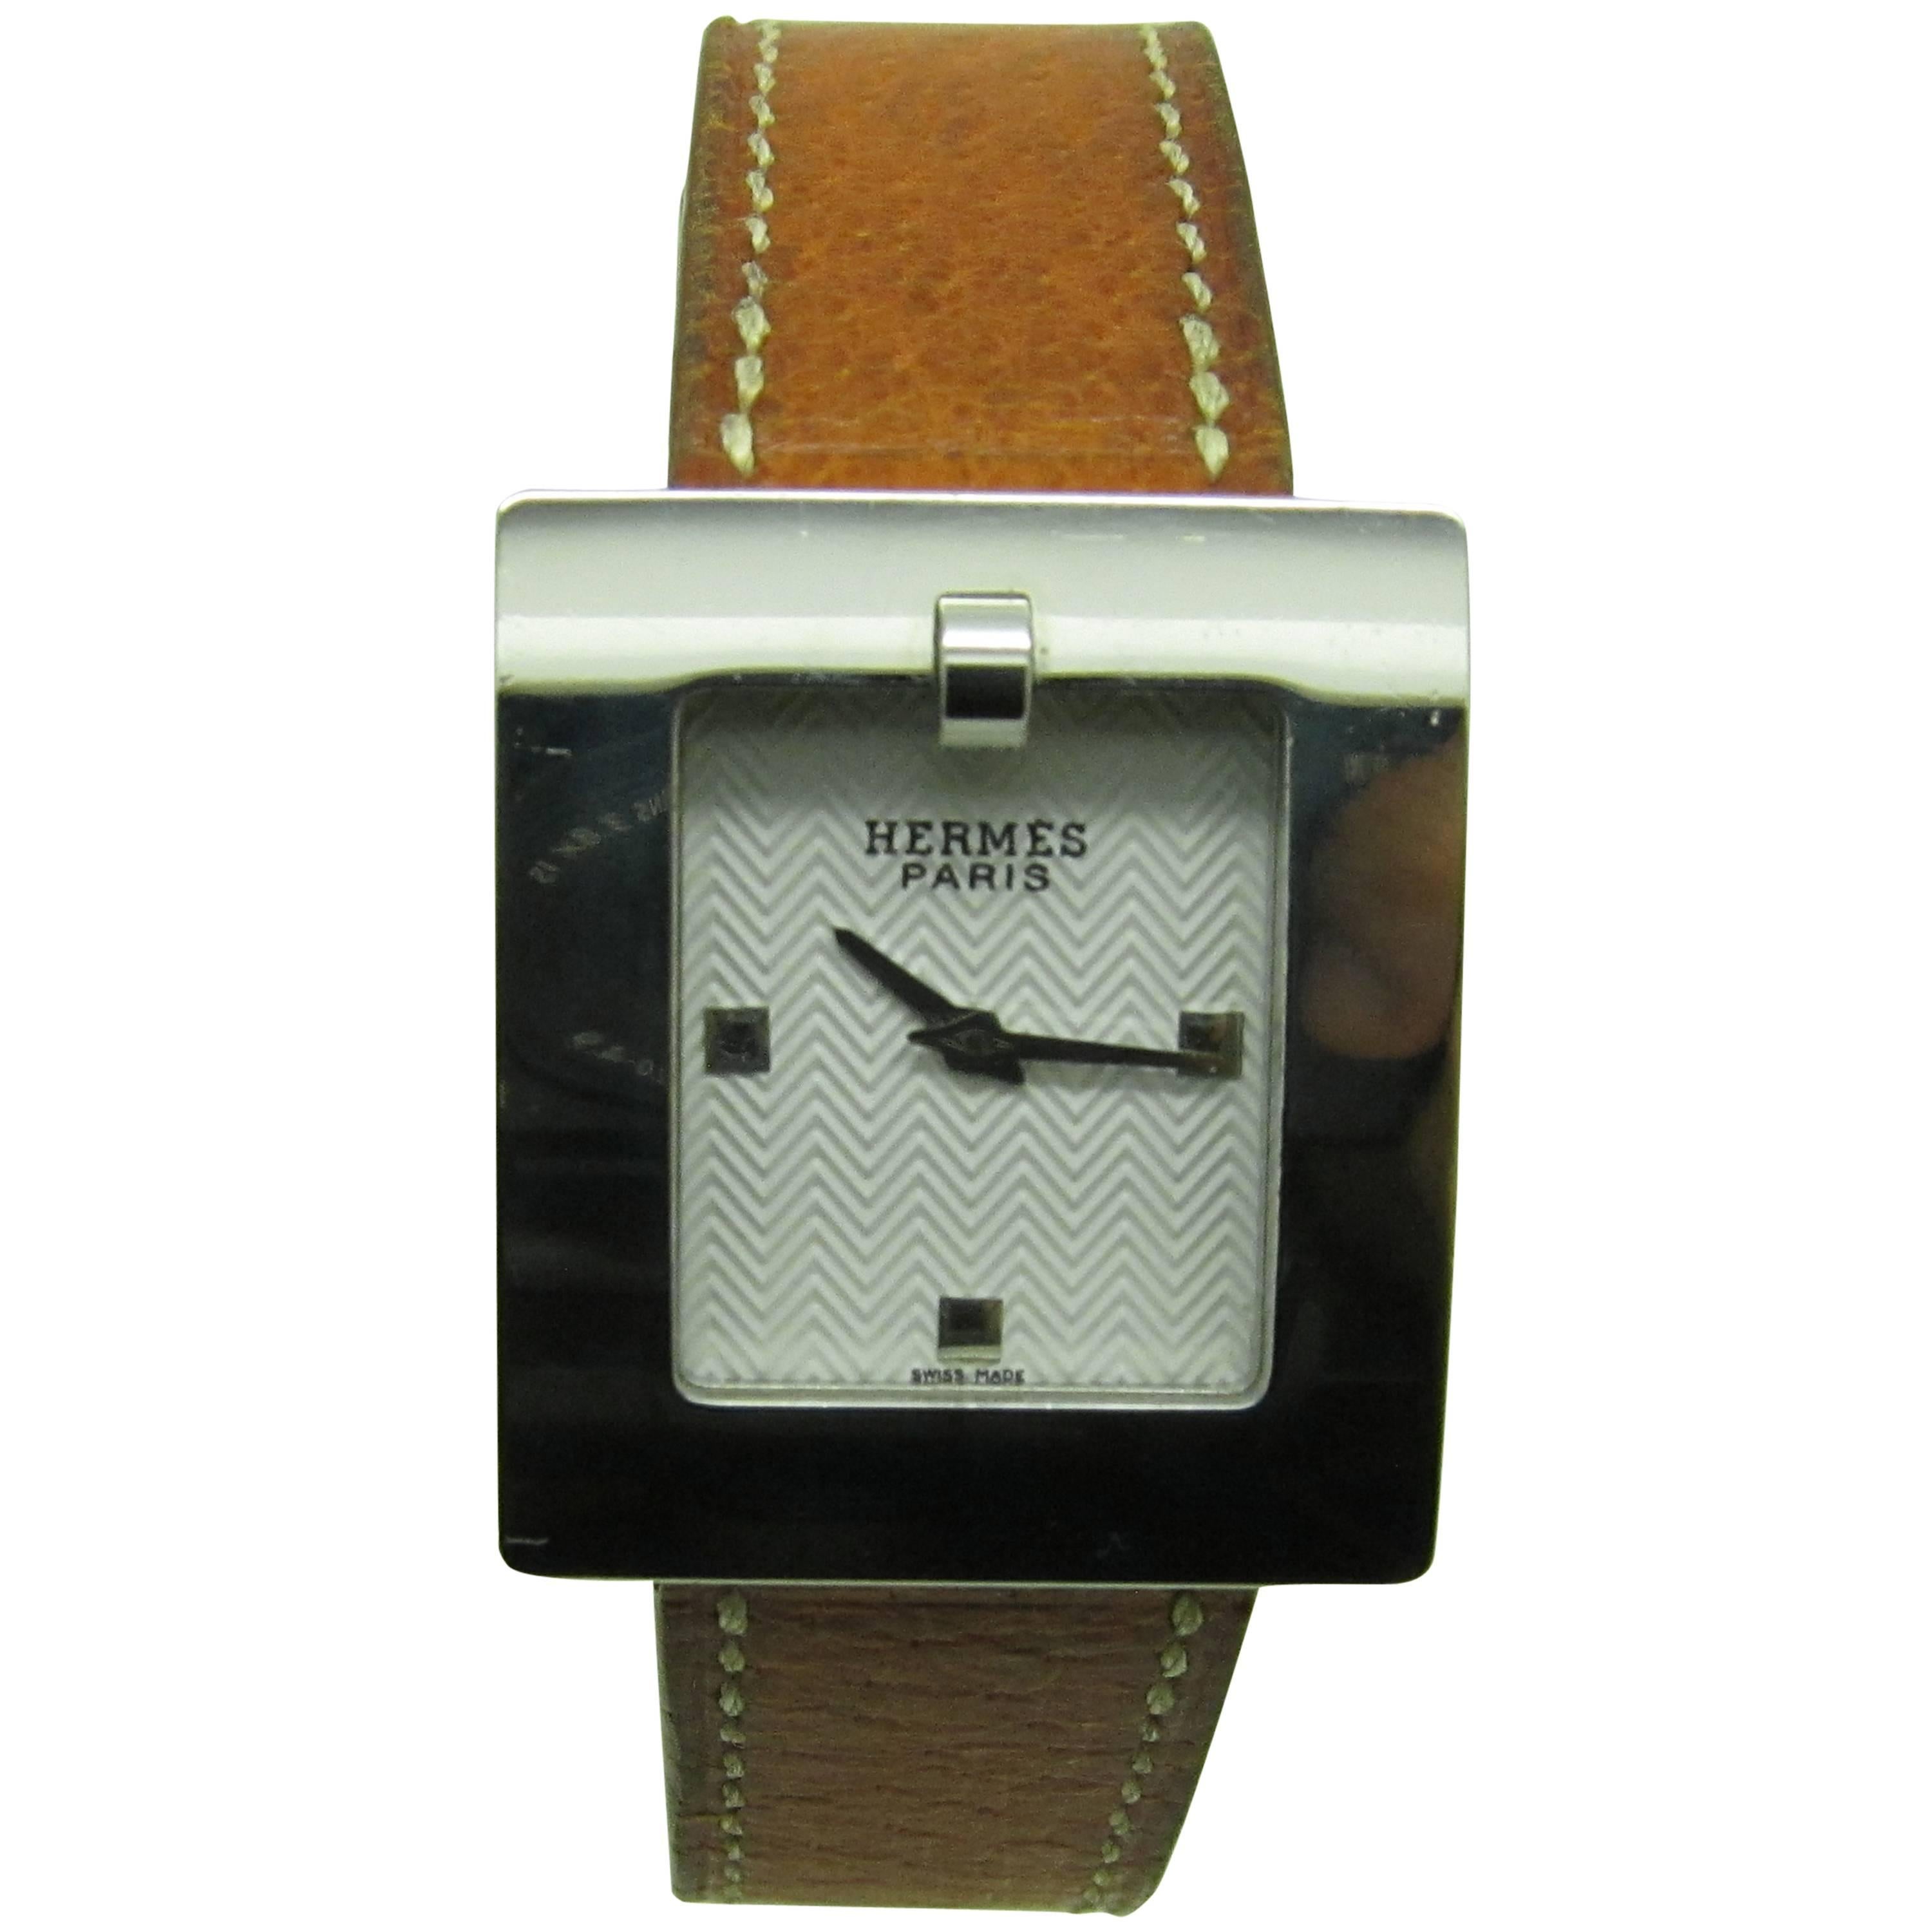 Hermes Belt Watch in Stainless Steel and Leather Band (D)